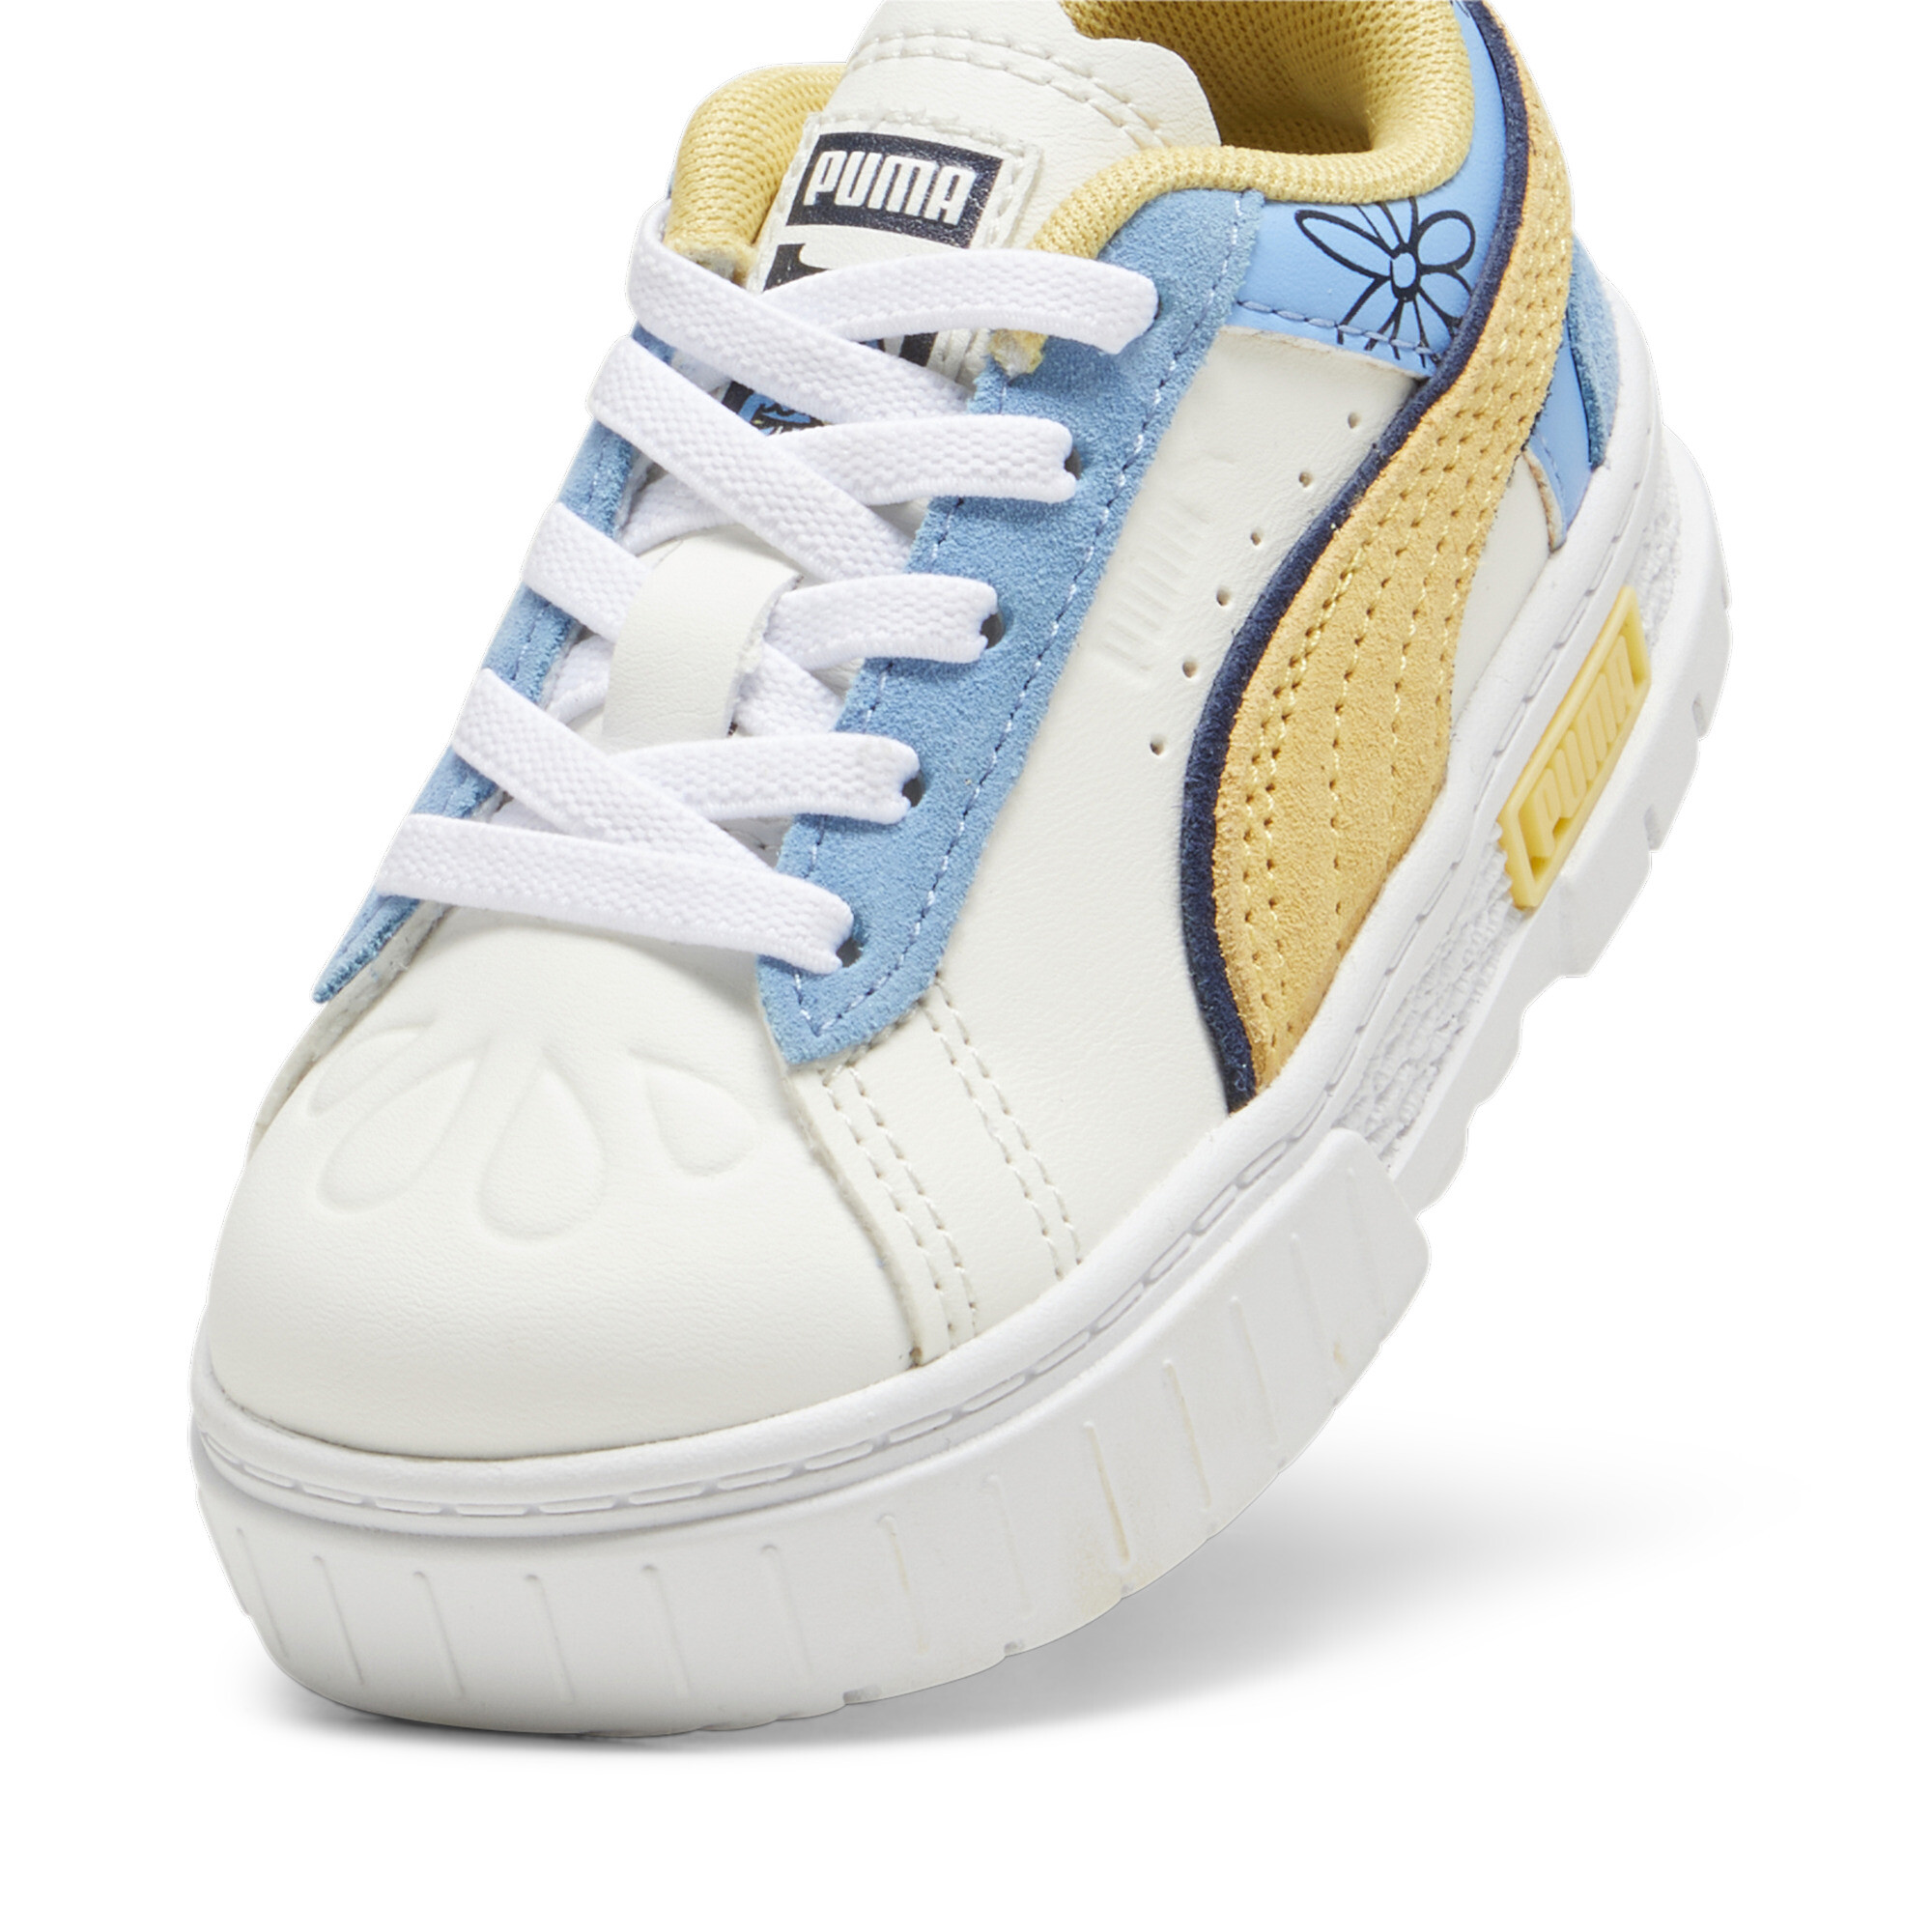 Women's Puma X THE SMURFS Mayze Toddlers' Sneakers, White, Size 25, Shoes